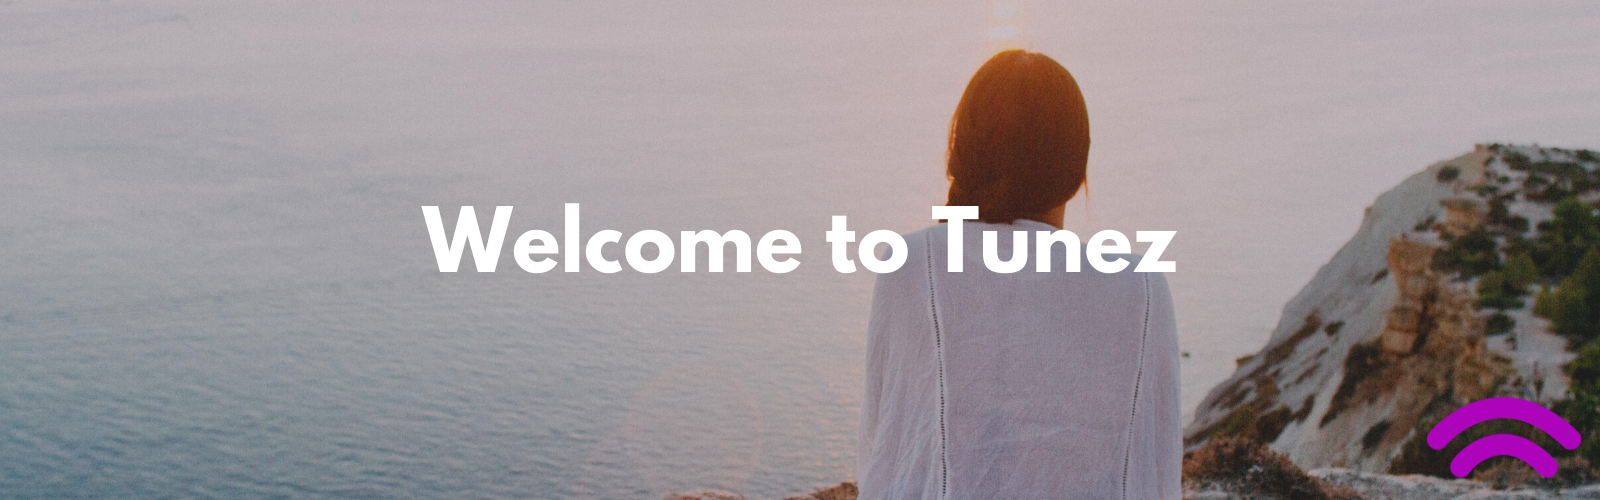 Welcome to Tunez blog